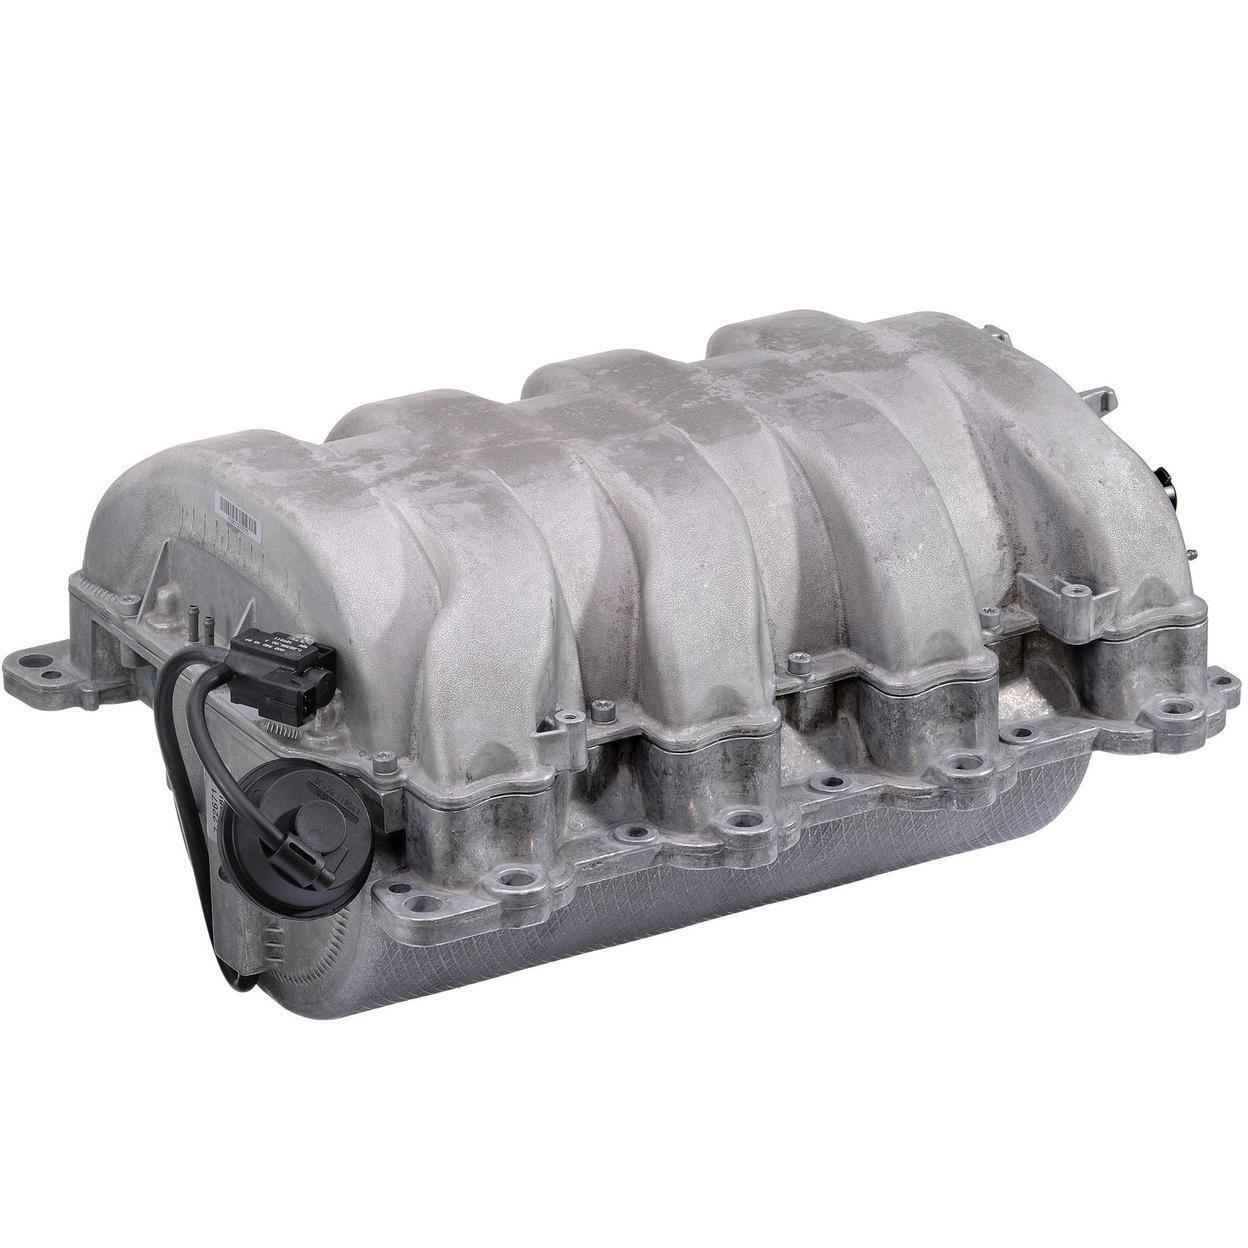 Engine Intake Manifold for 2001-2002 Mercedes S55 AMG